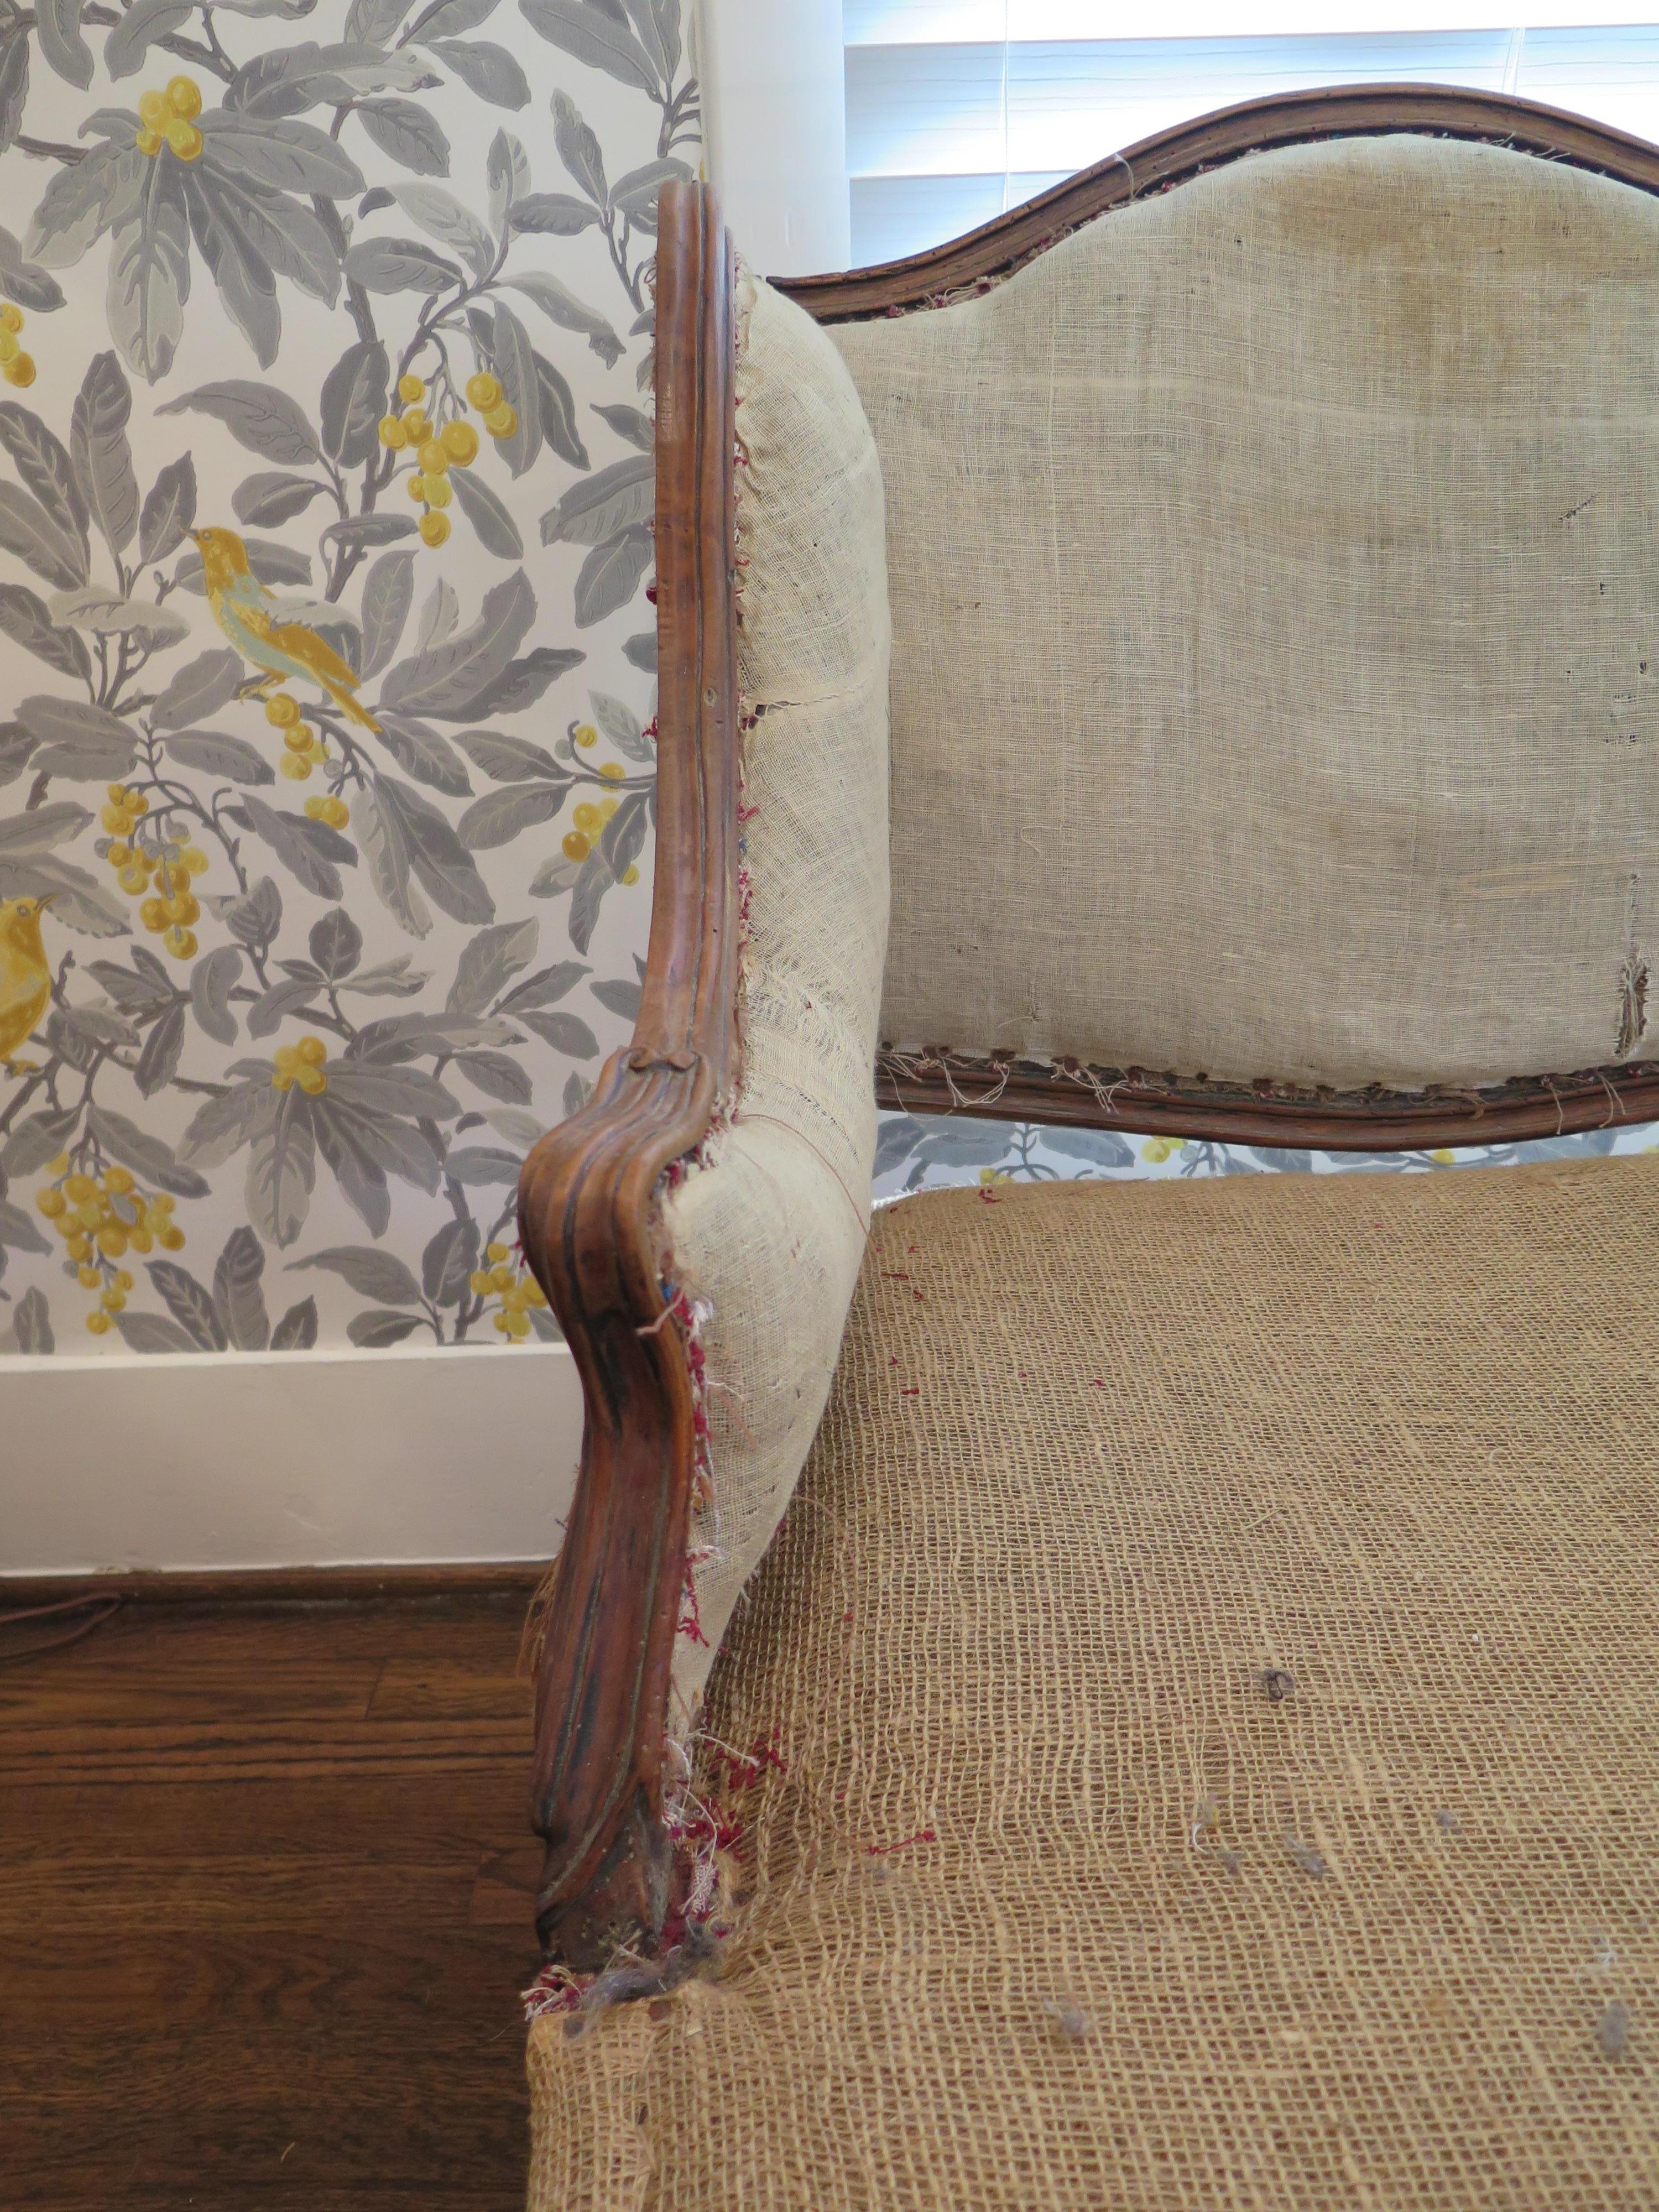 18th century French walnut three-seat canapé frame, ready to be upholstered in the perfect fabric for your room.